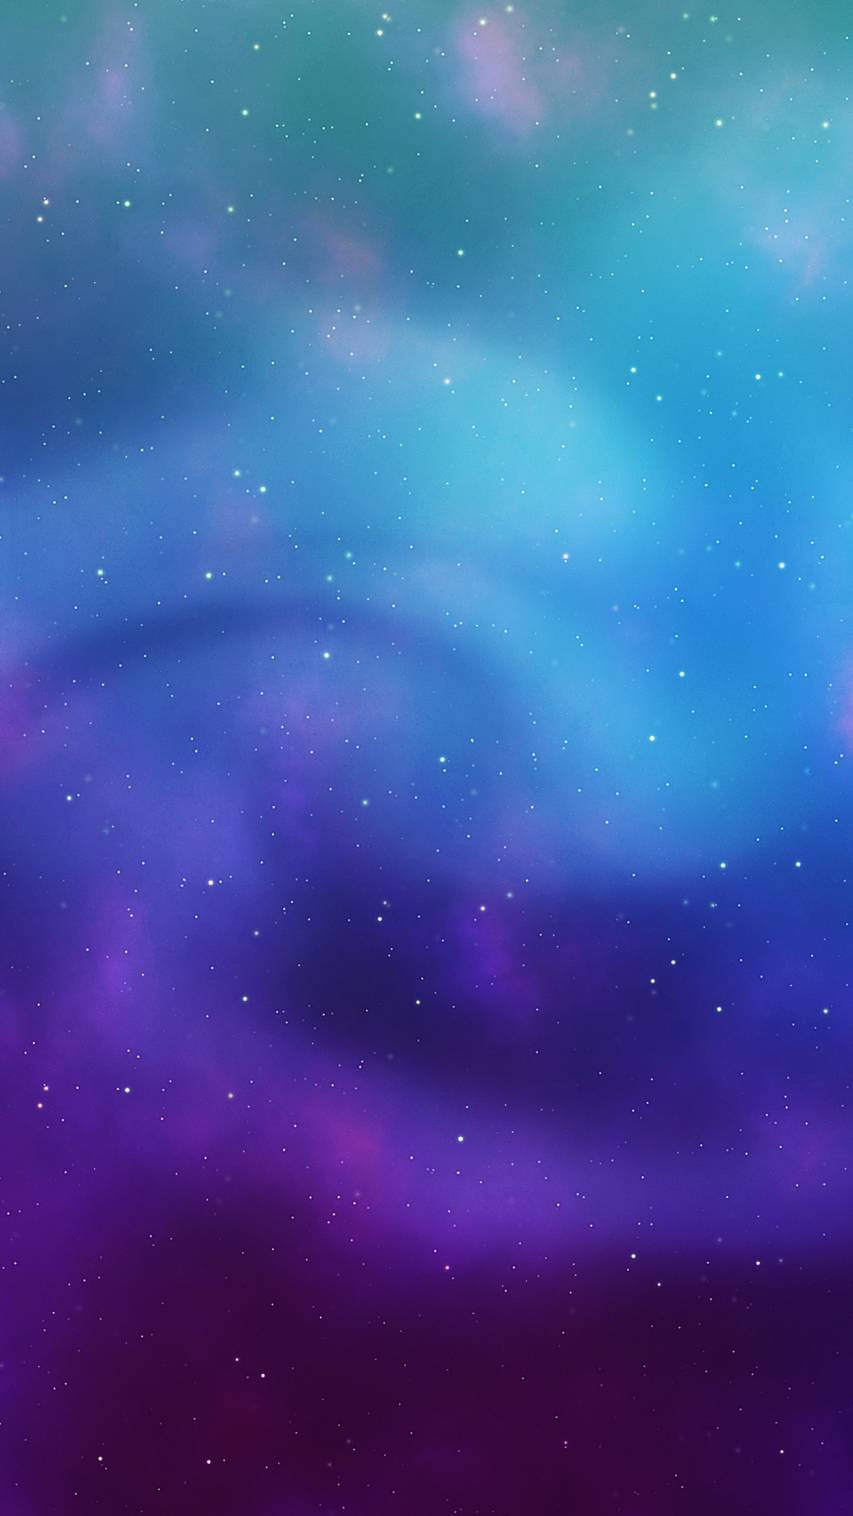 Blue Galaxy iPhone Backgrounds